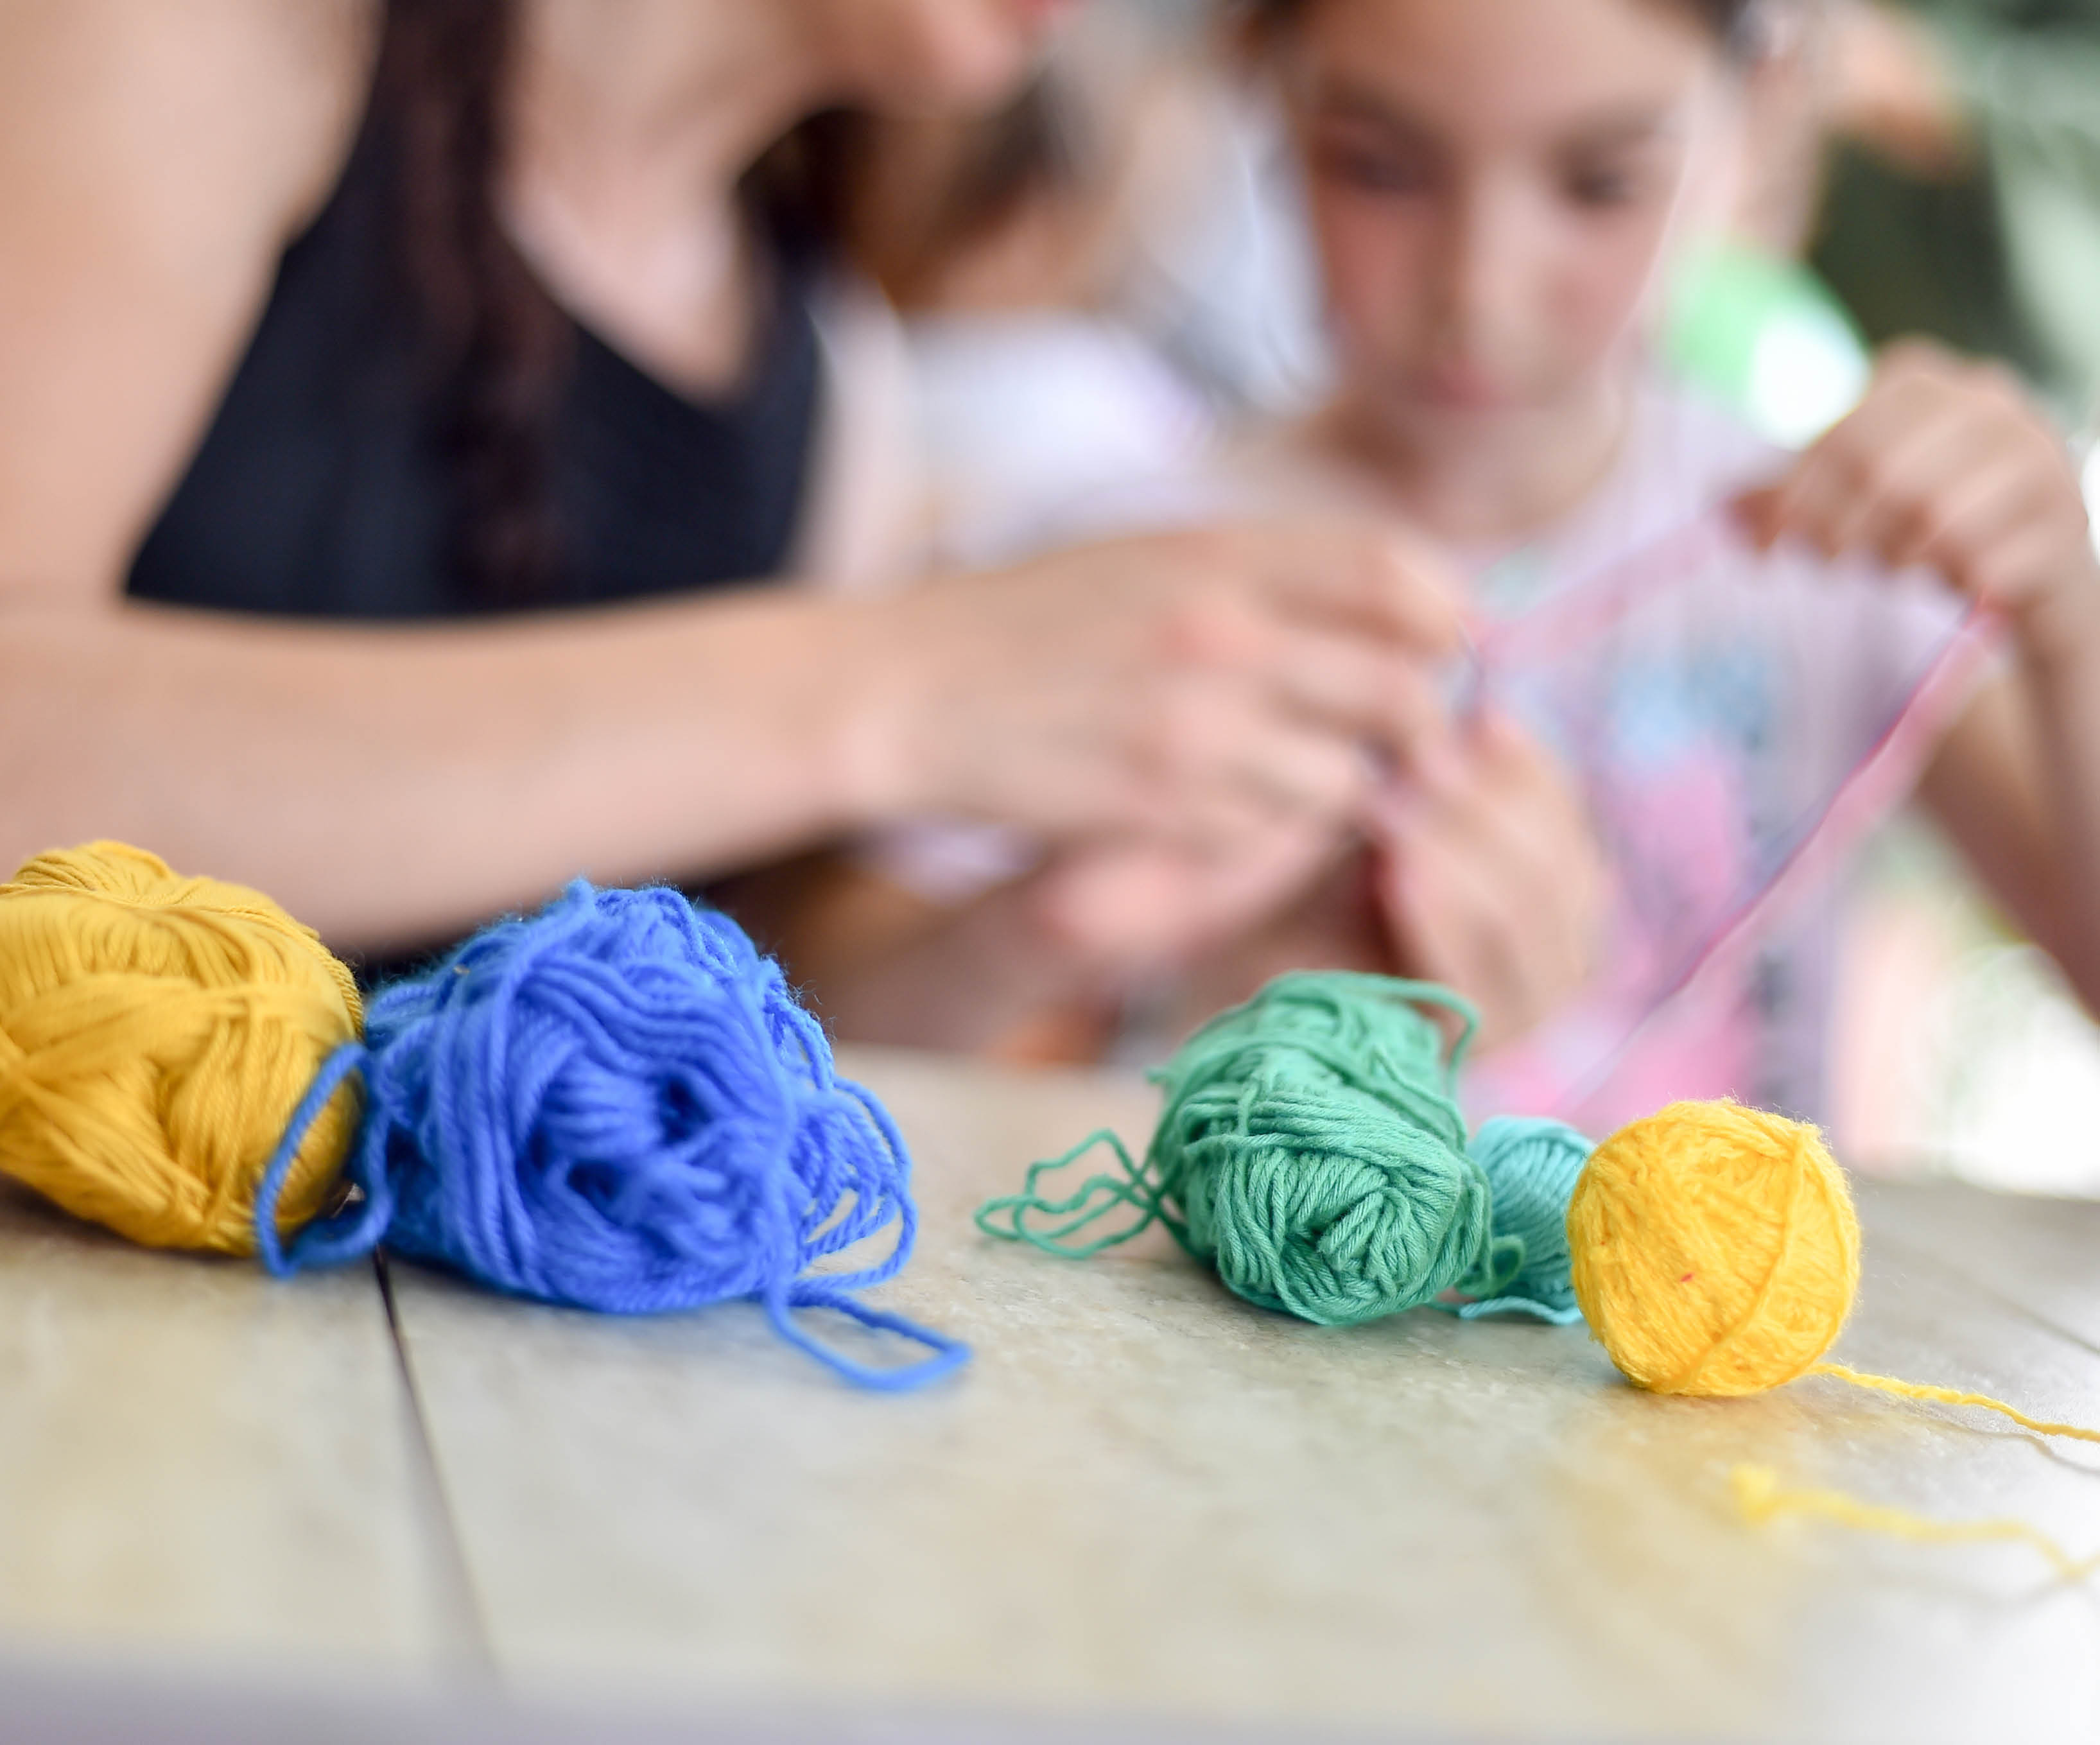 It’s never too early to get hooked on knitting! These school holidays kids are invited to the Sylvania Library to learn the basics of knitting.